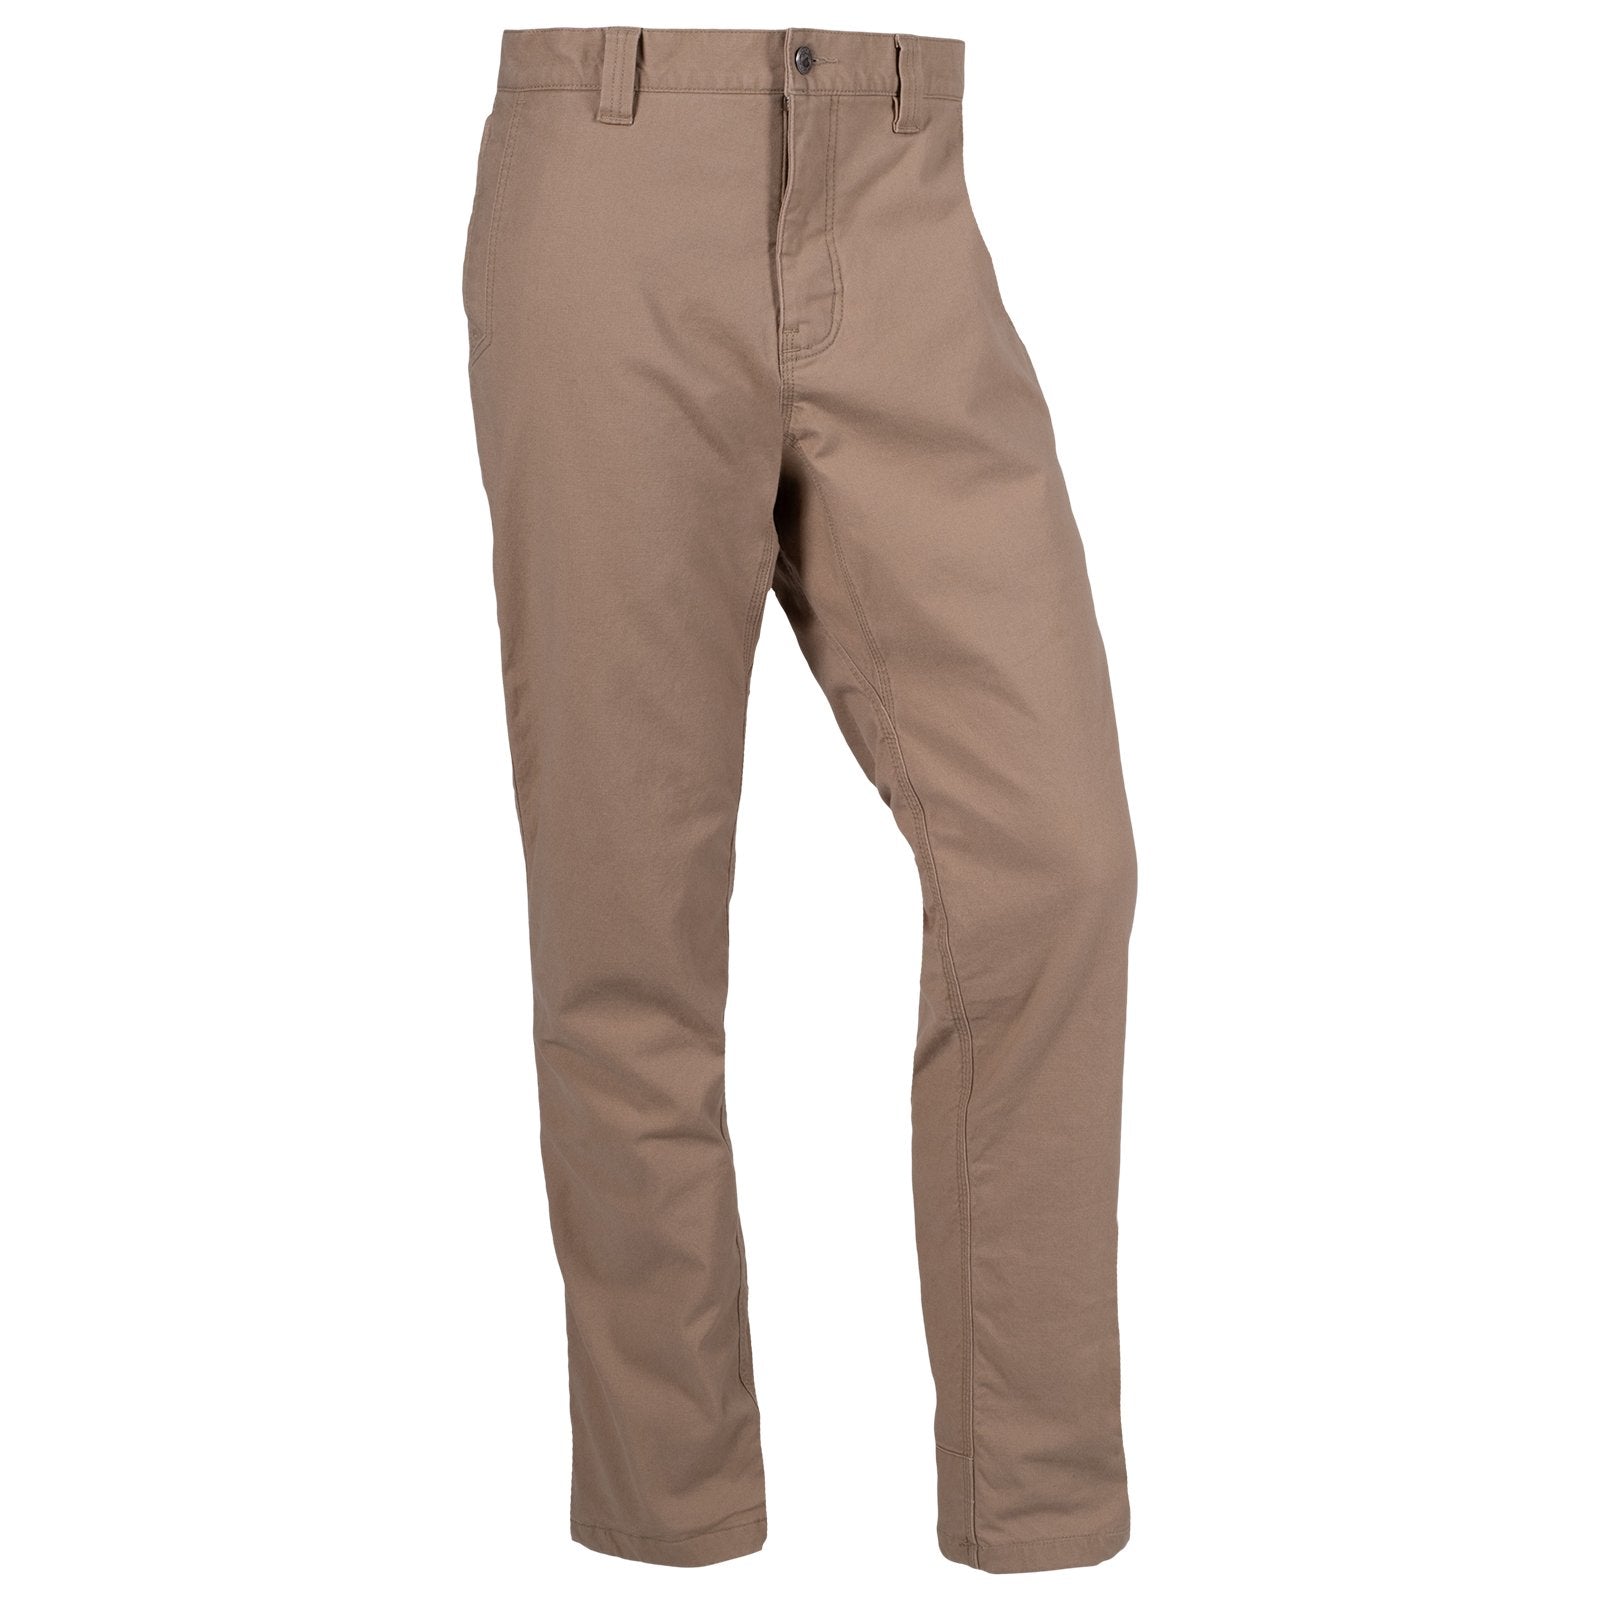 Mountain Pants New Classic Fit view of khaki